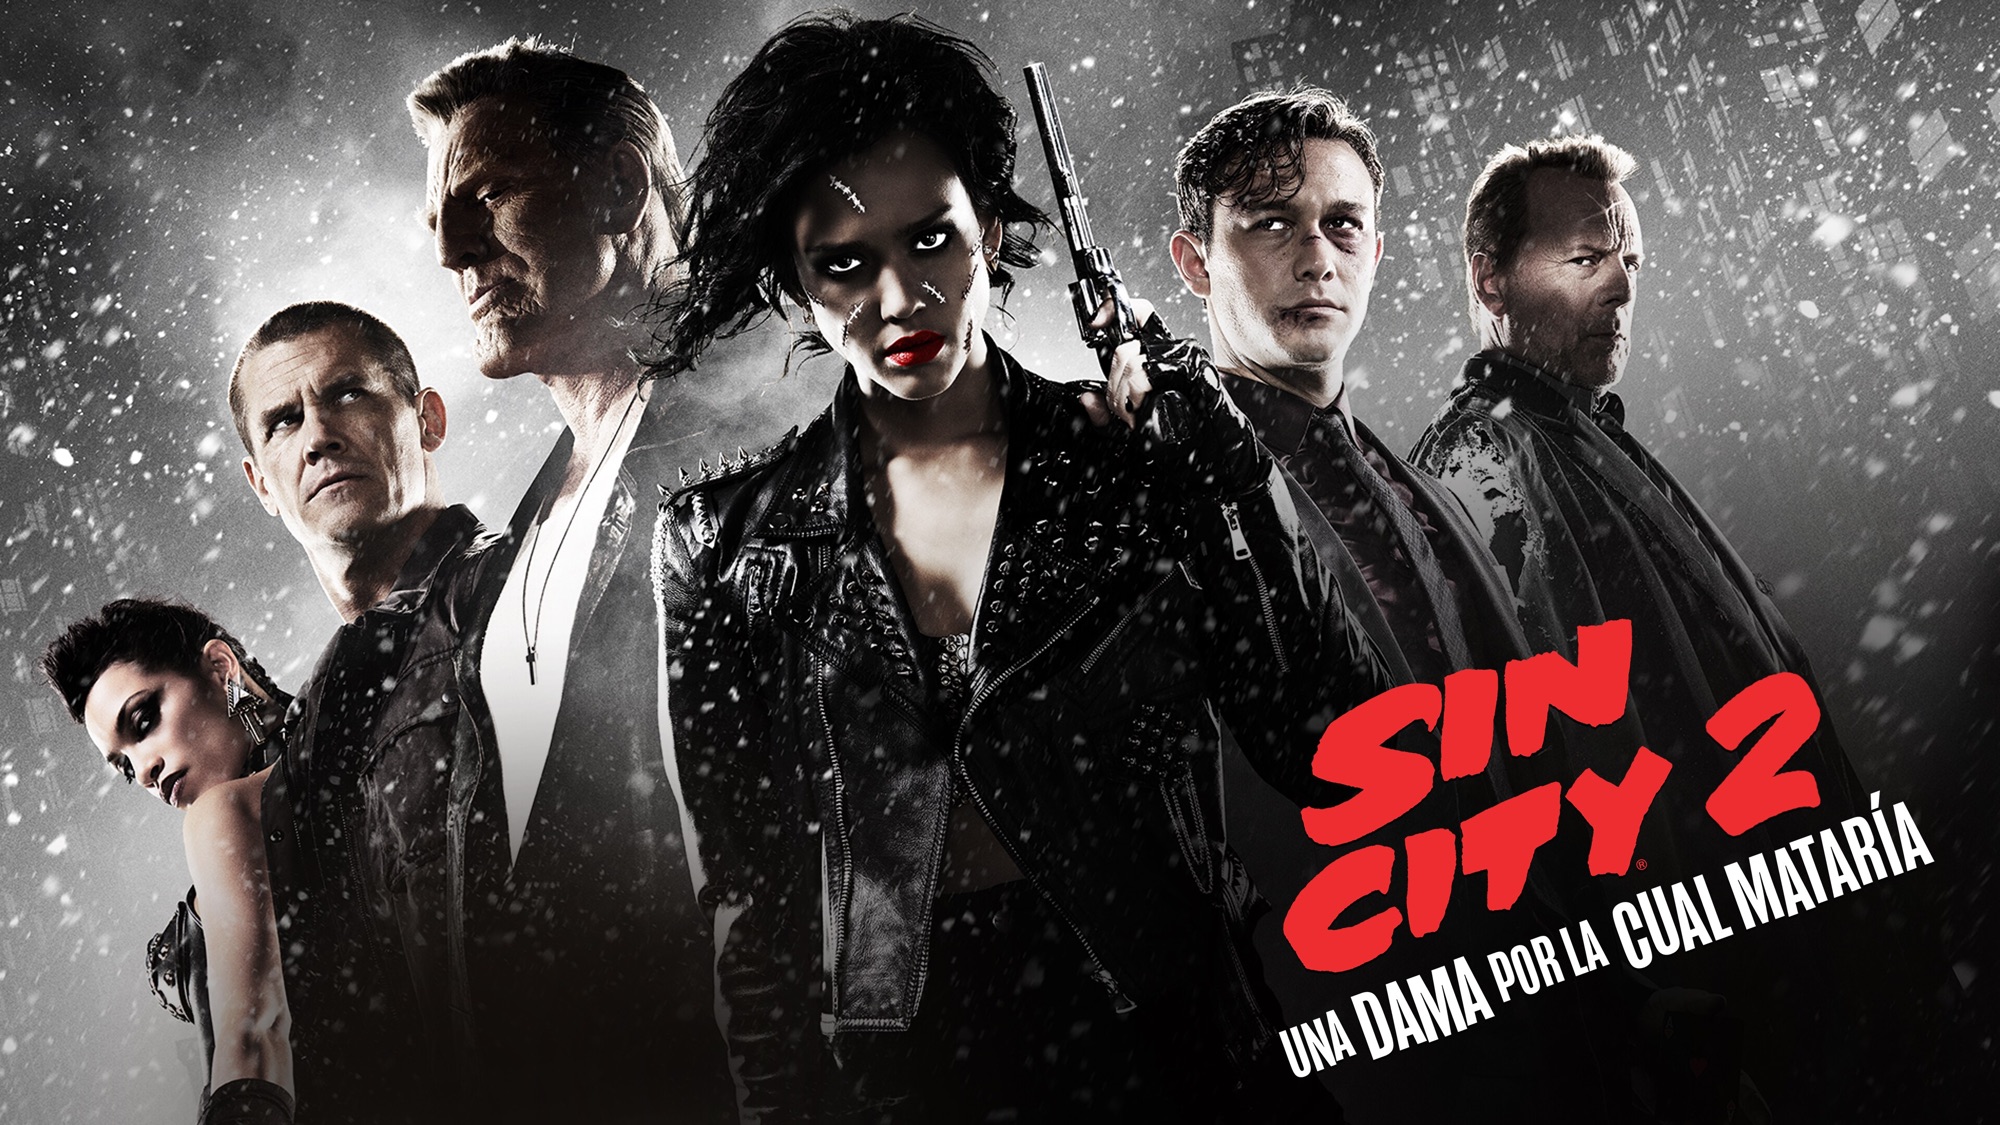 Sin City: A Dame to Kill For HD desktop wallpaper featuring stylized, black and white cityscape with a hint of red accent, capturing the essence of the movie's noir aesthetic.